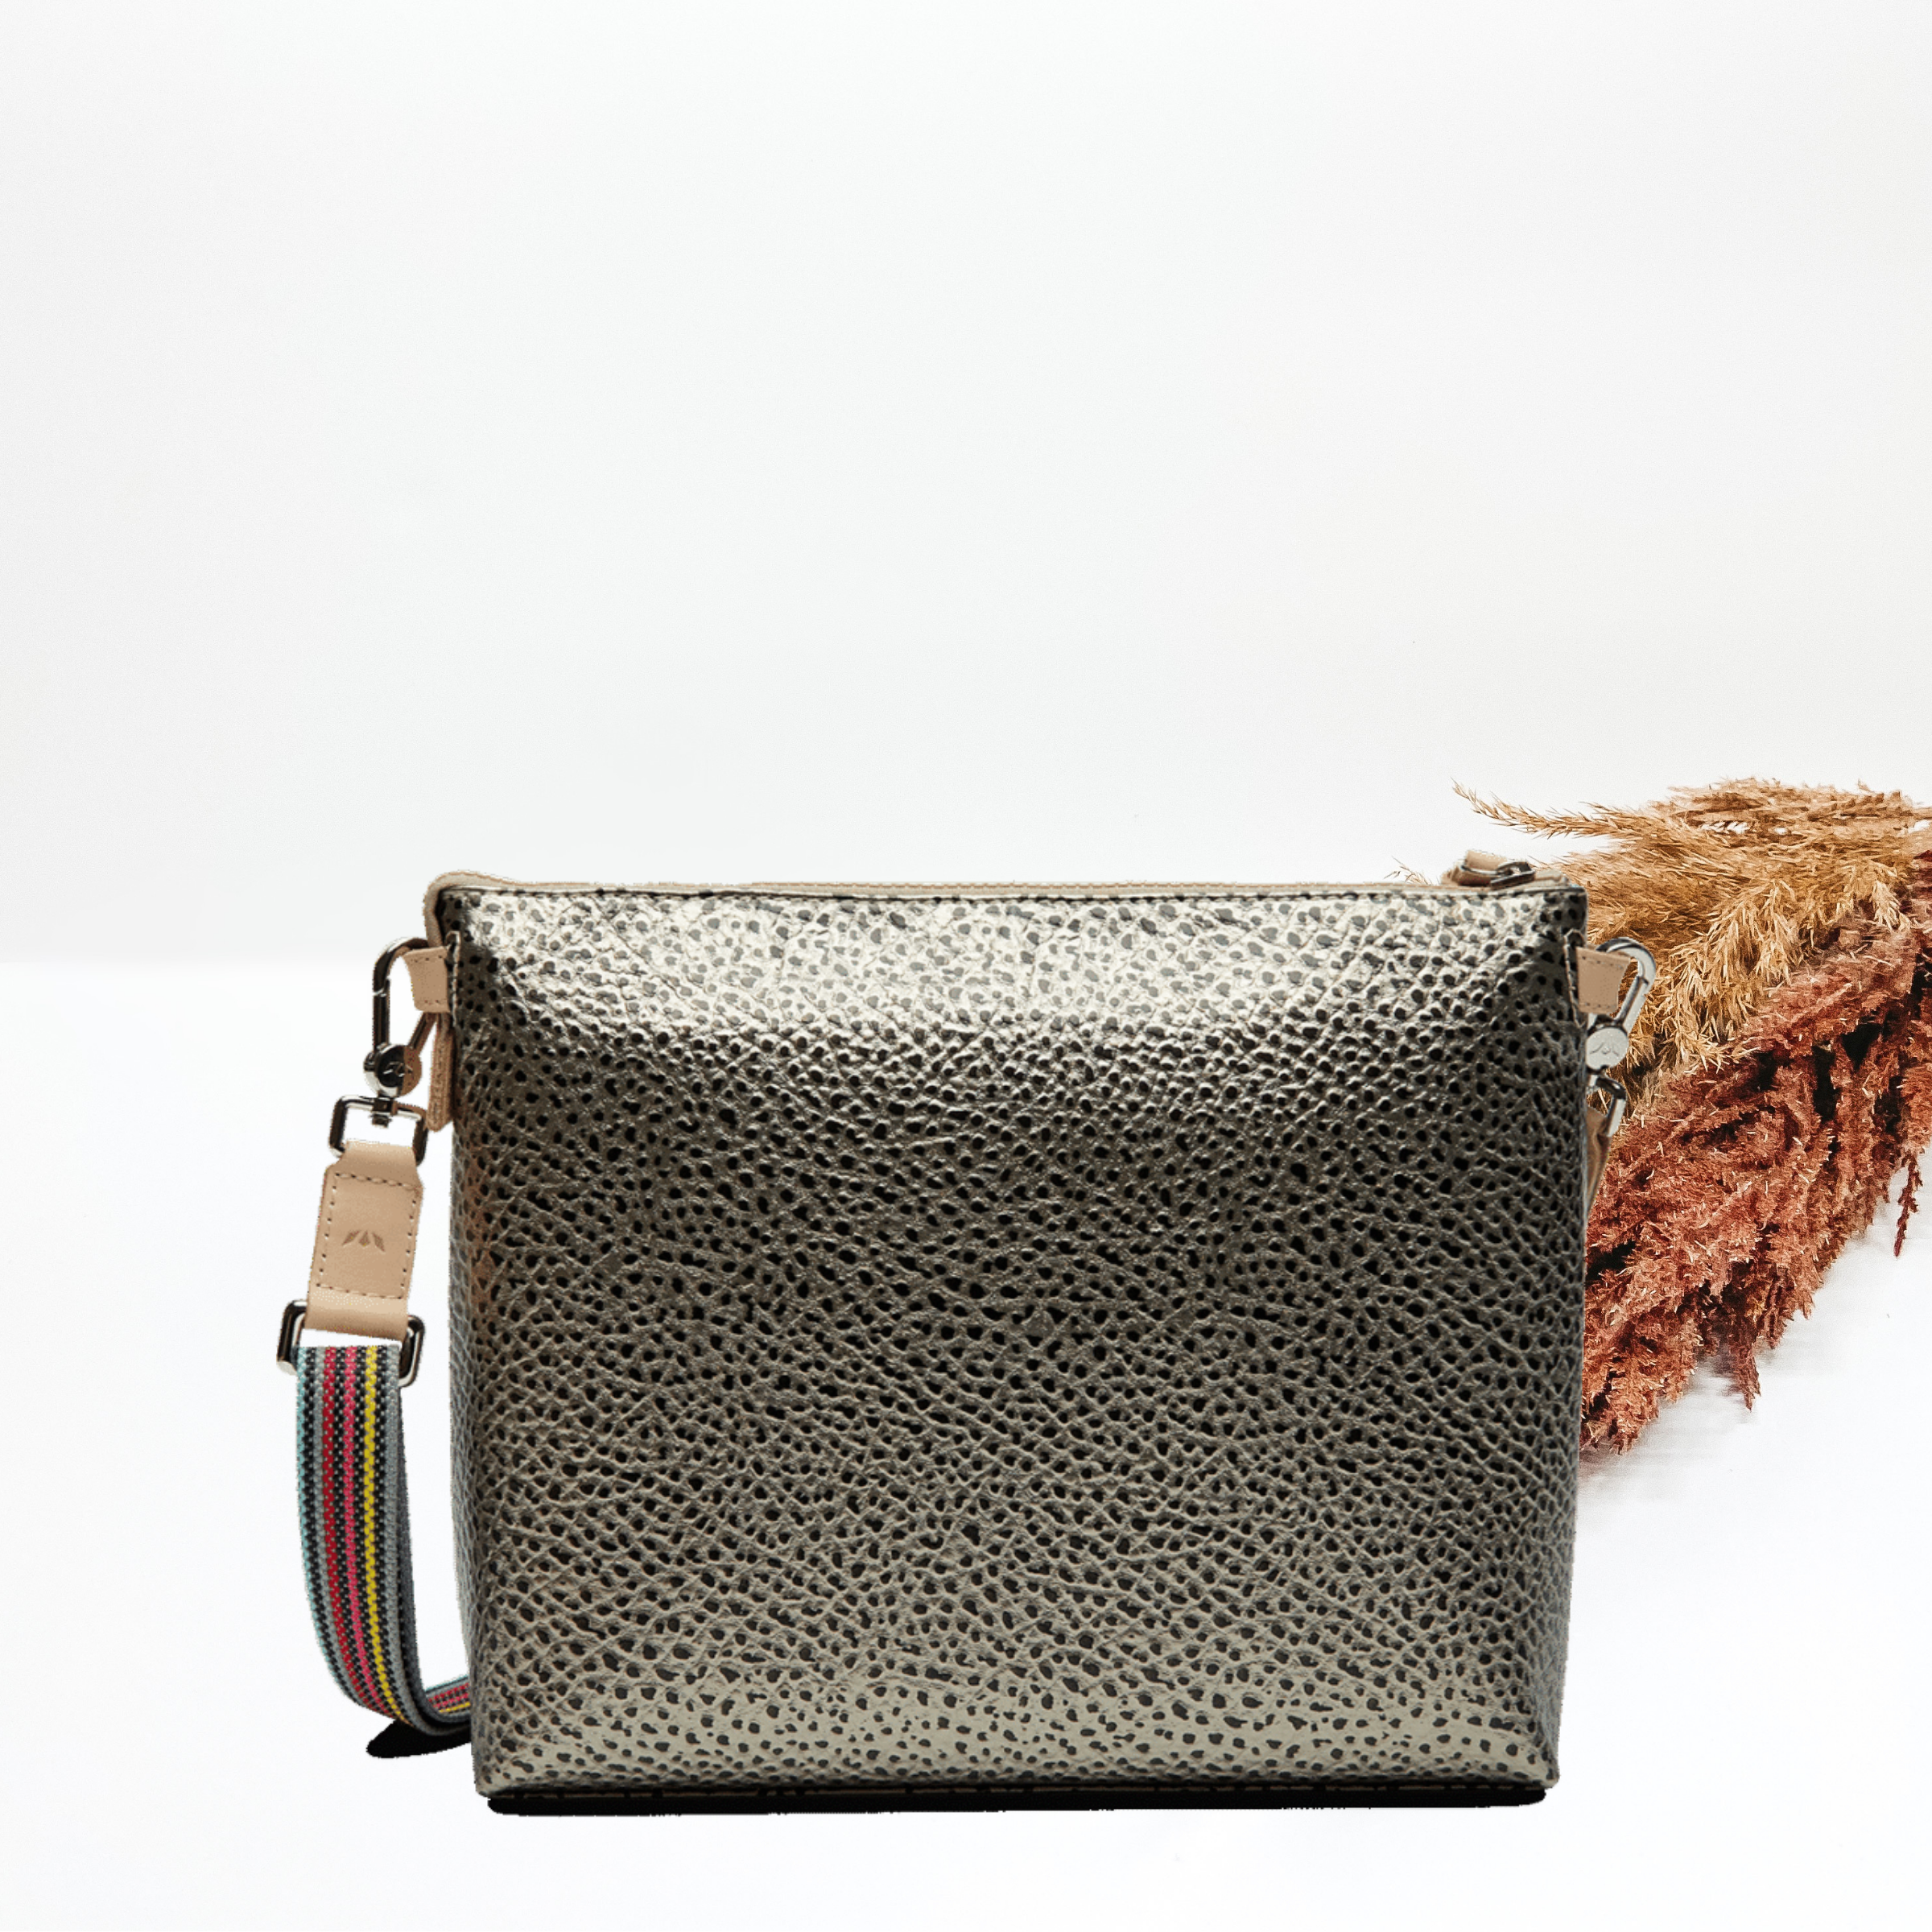 Consuela | Tommy Downtown Crossbody Bag - Giddy Up Glamour Boutique